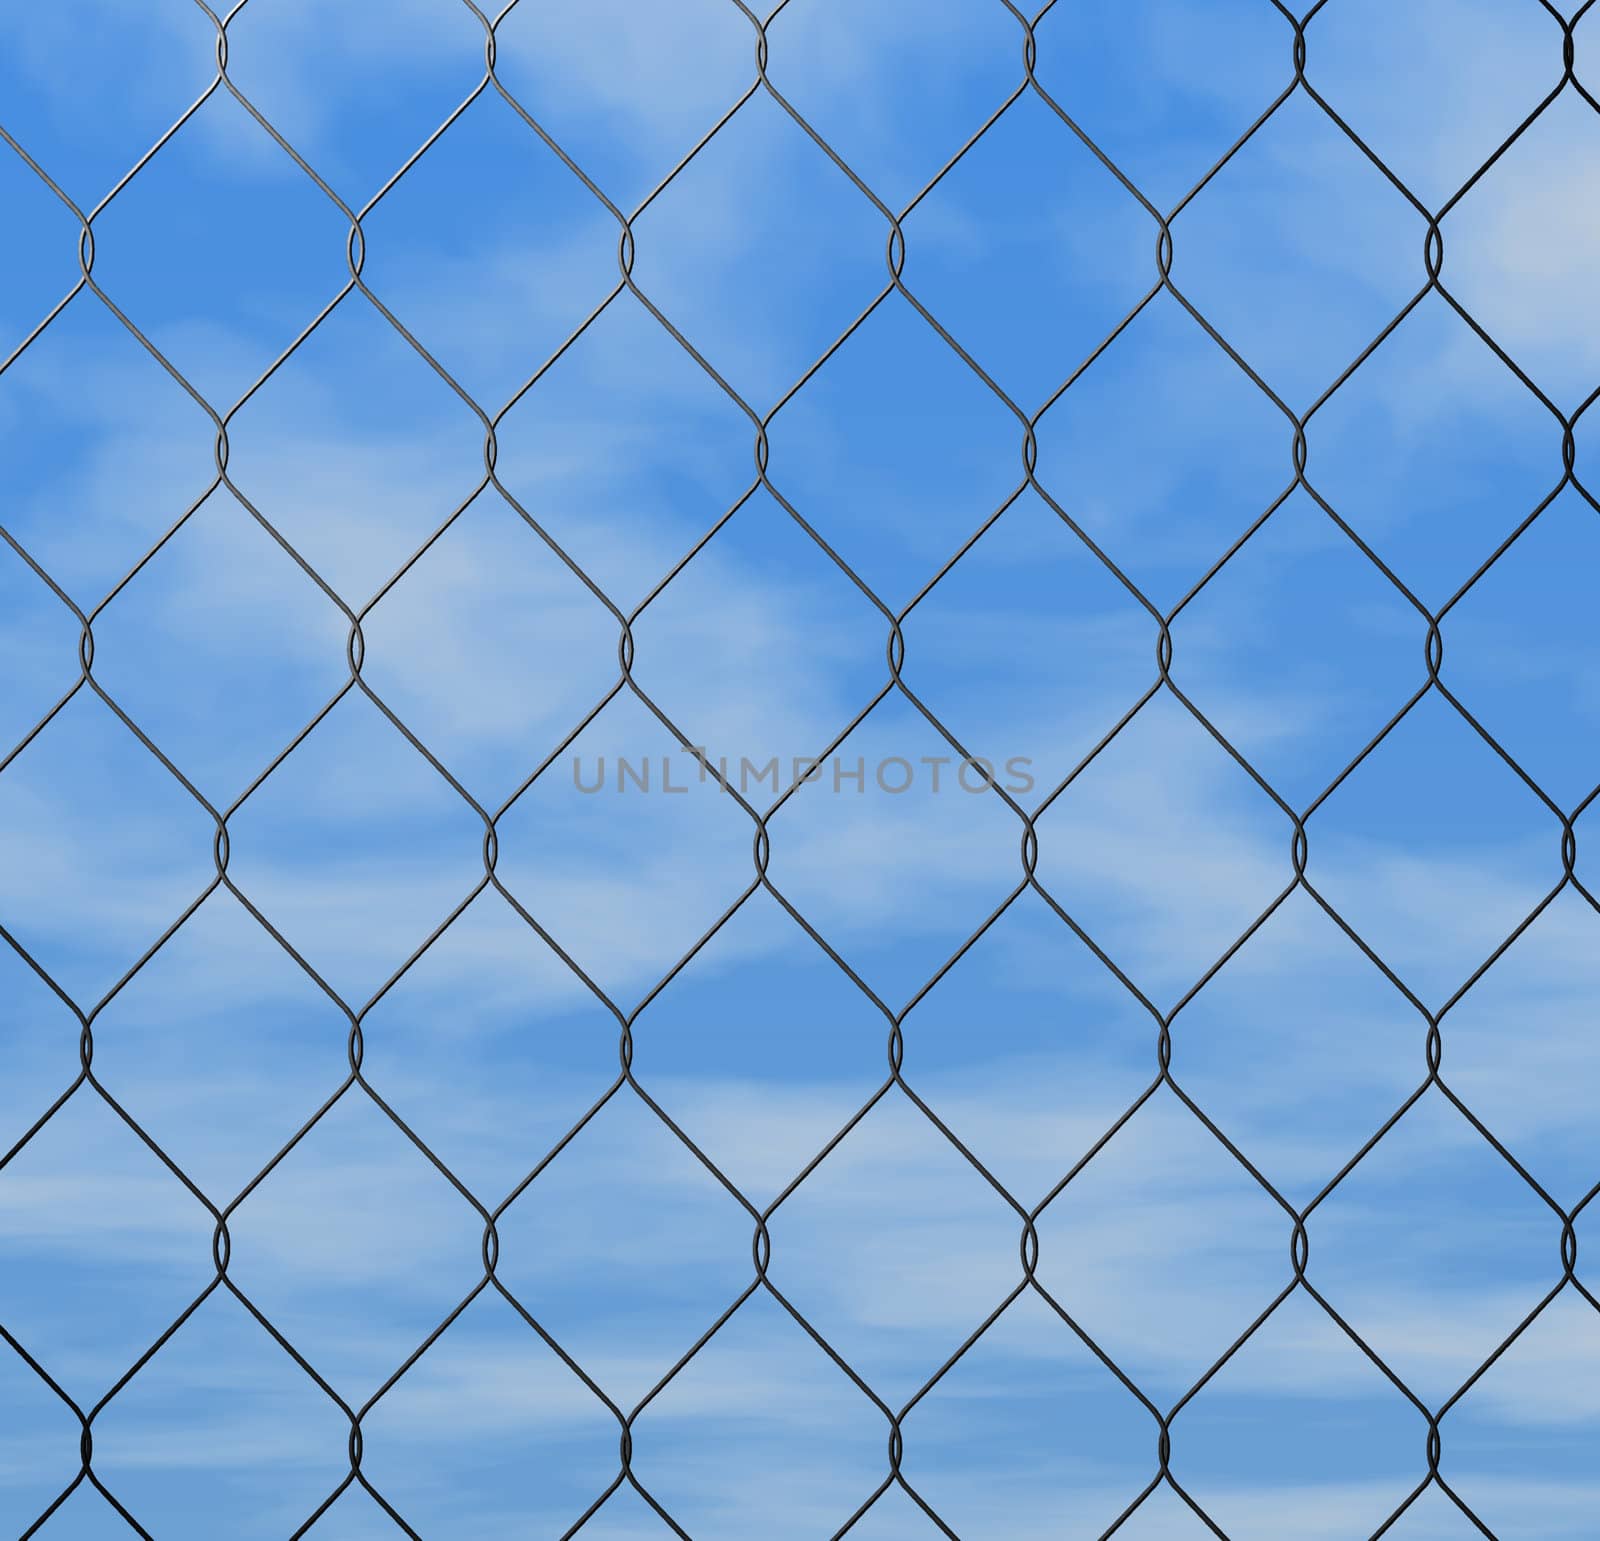 close up of chain link fence nice detail good background blue sky with clouds